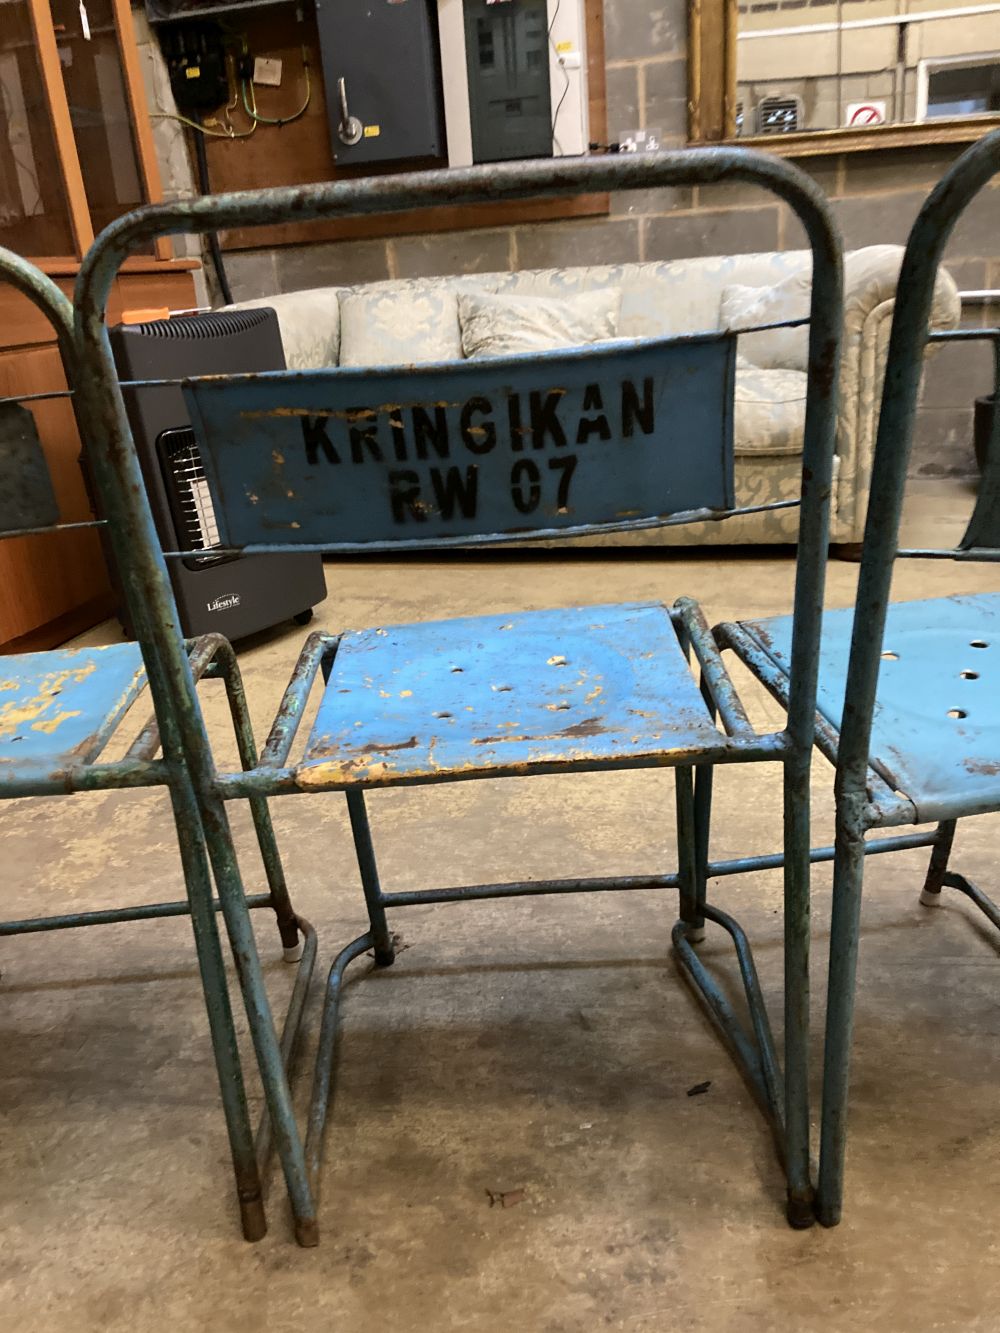 Four painted metal stacking chairs